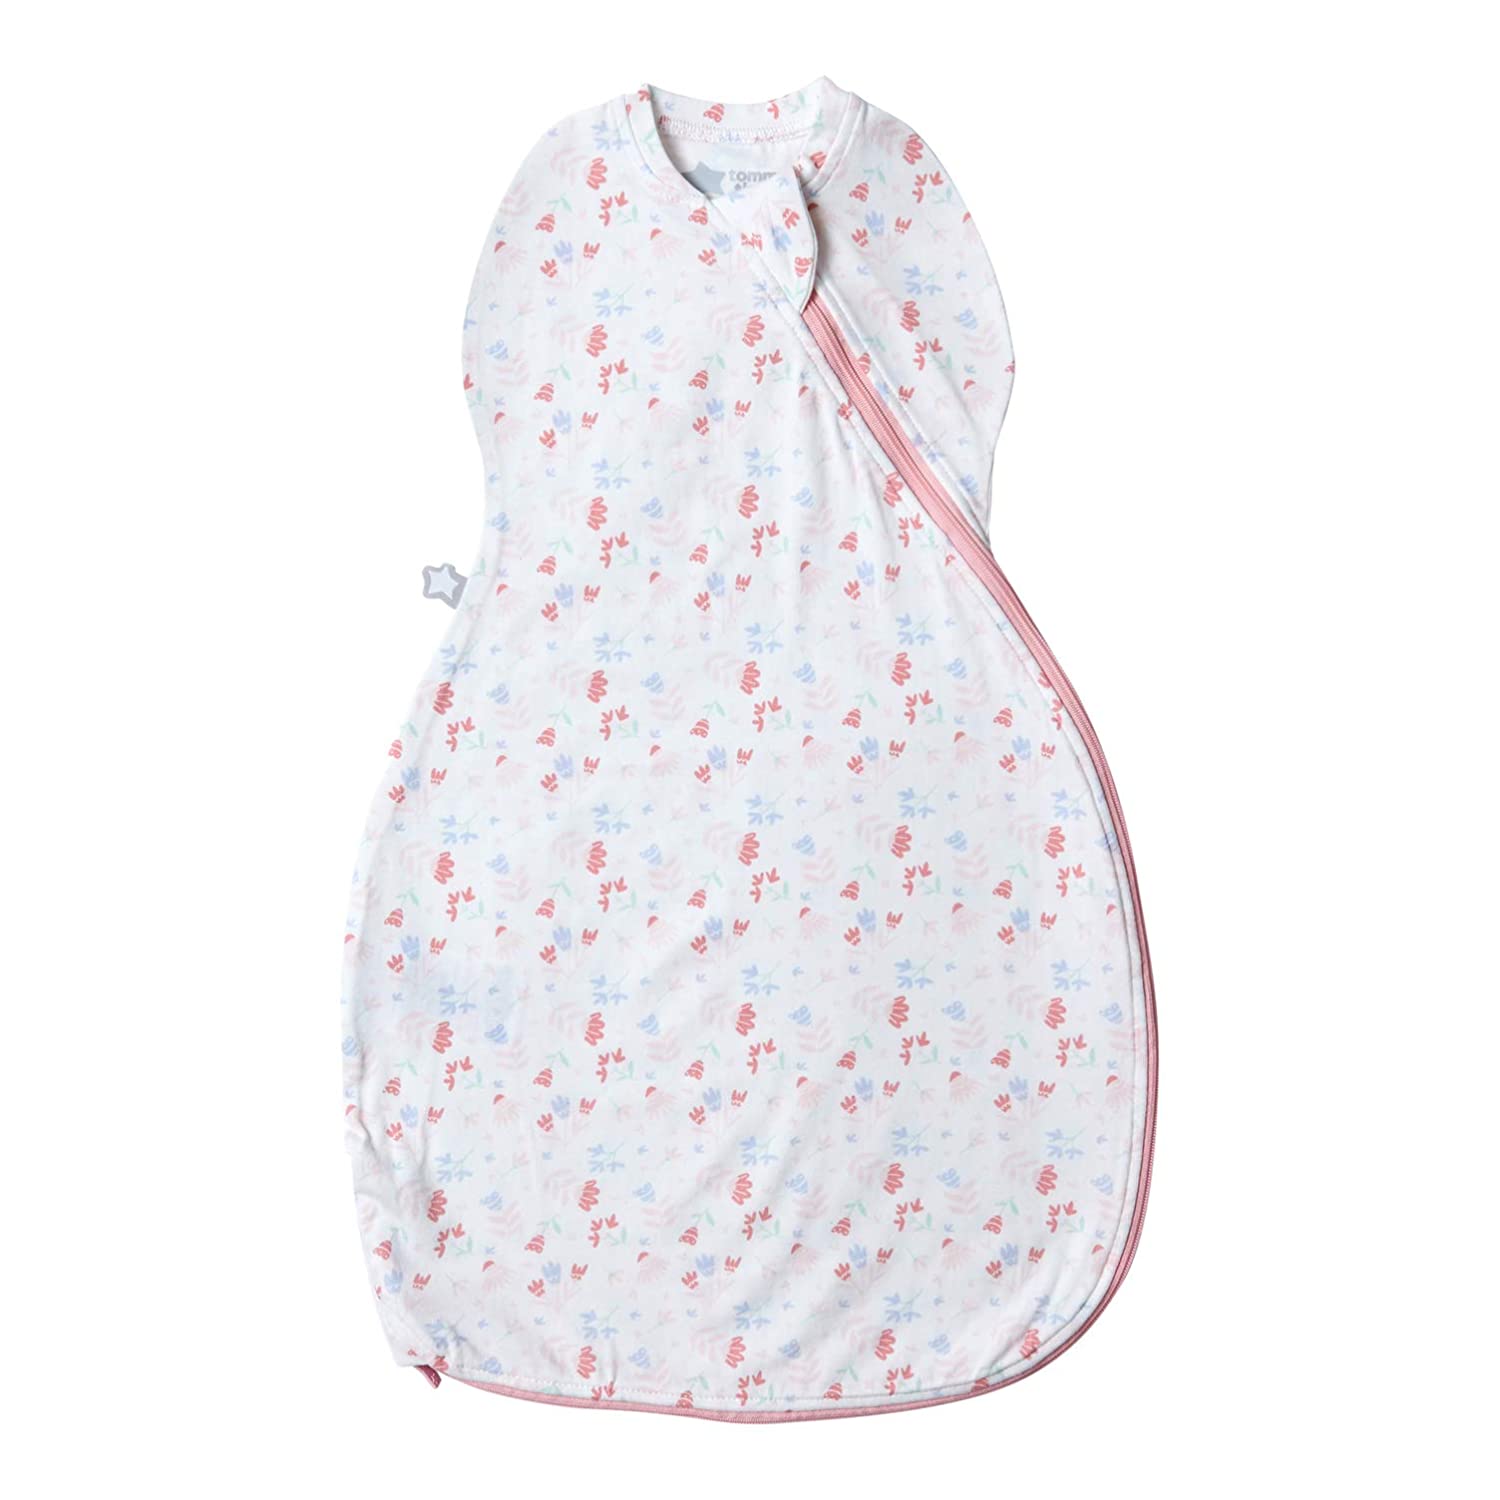 Tommee Tippee The Original Grobag Easy Swaddle Newborn Baby Sleeping Bag Soft Cotton Fabric 0-3m Lovely Petals